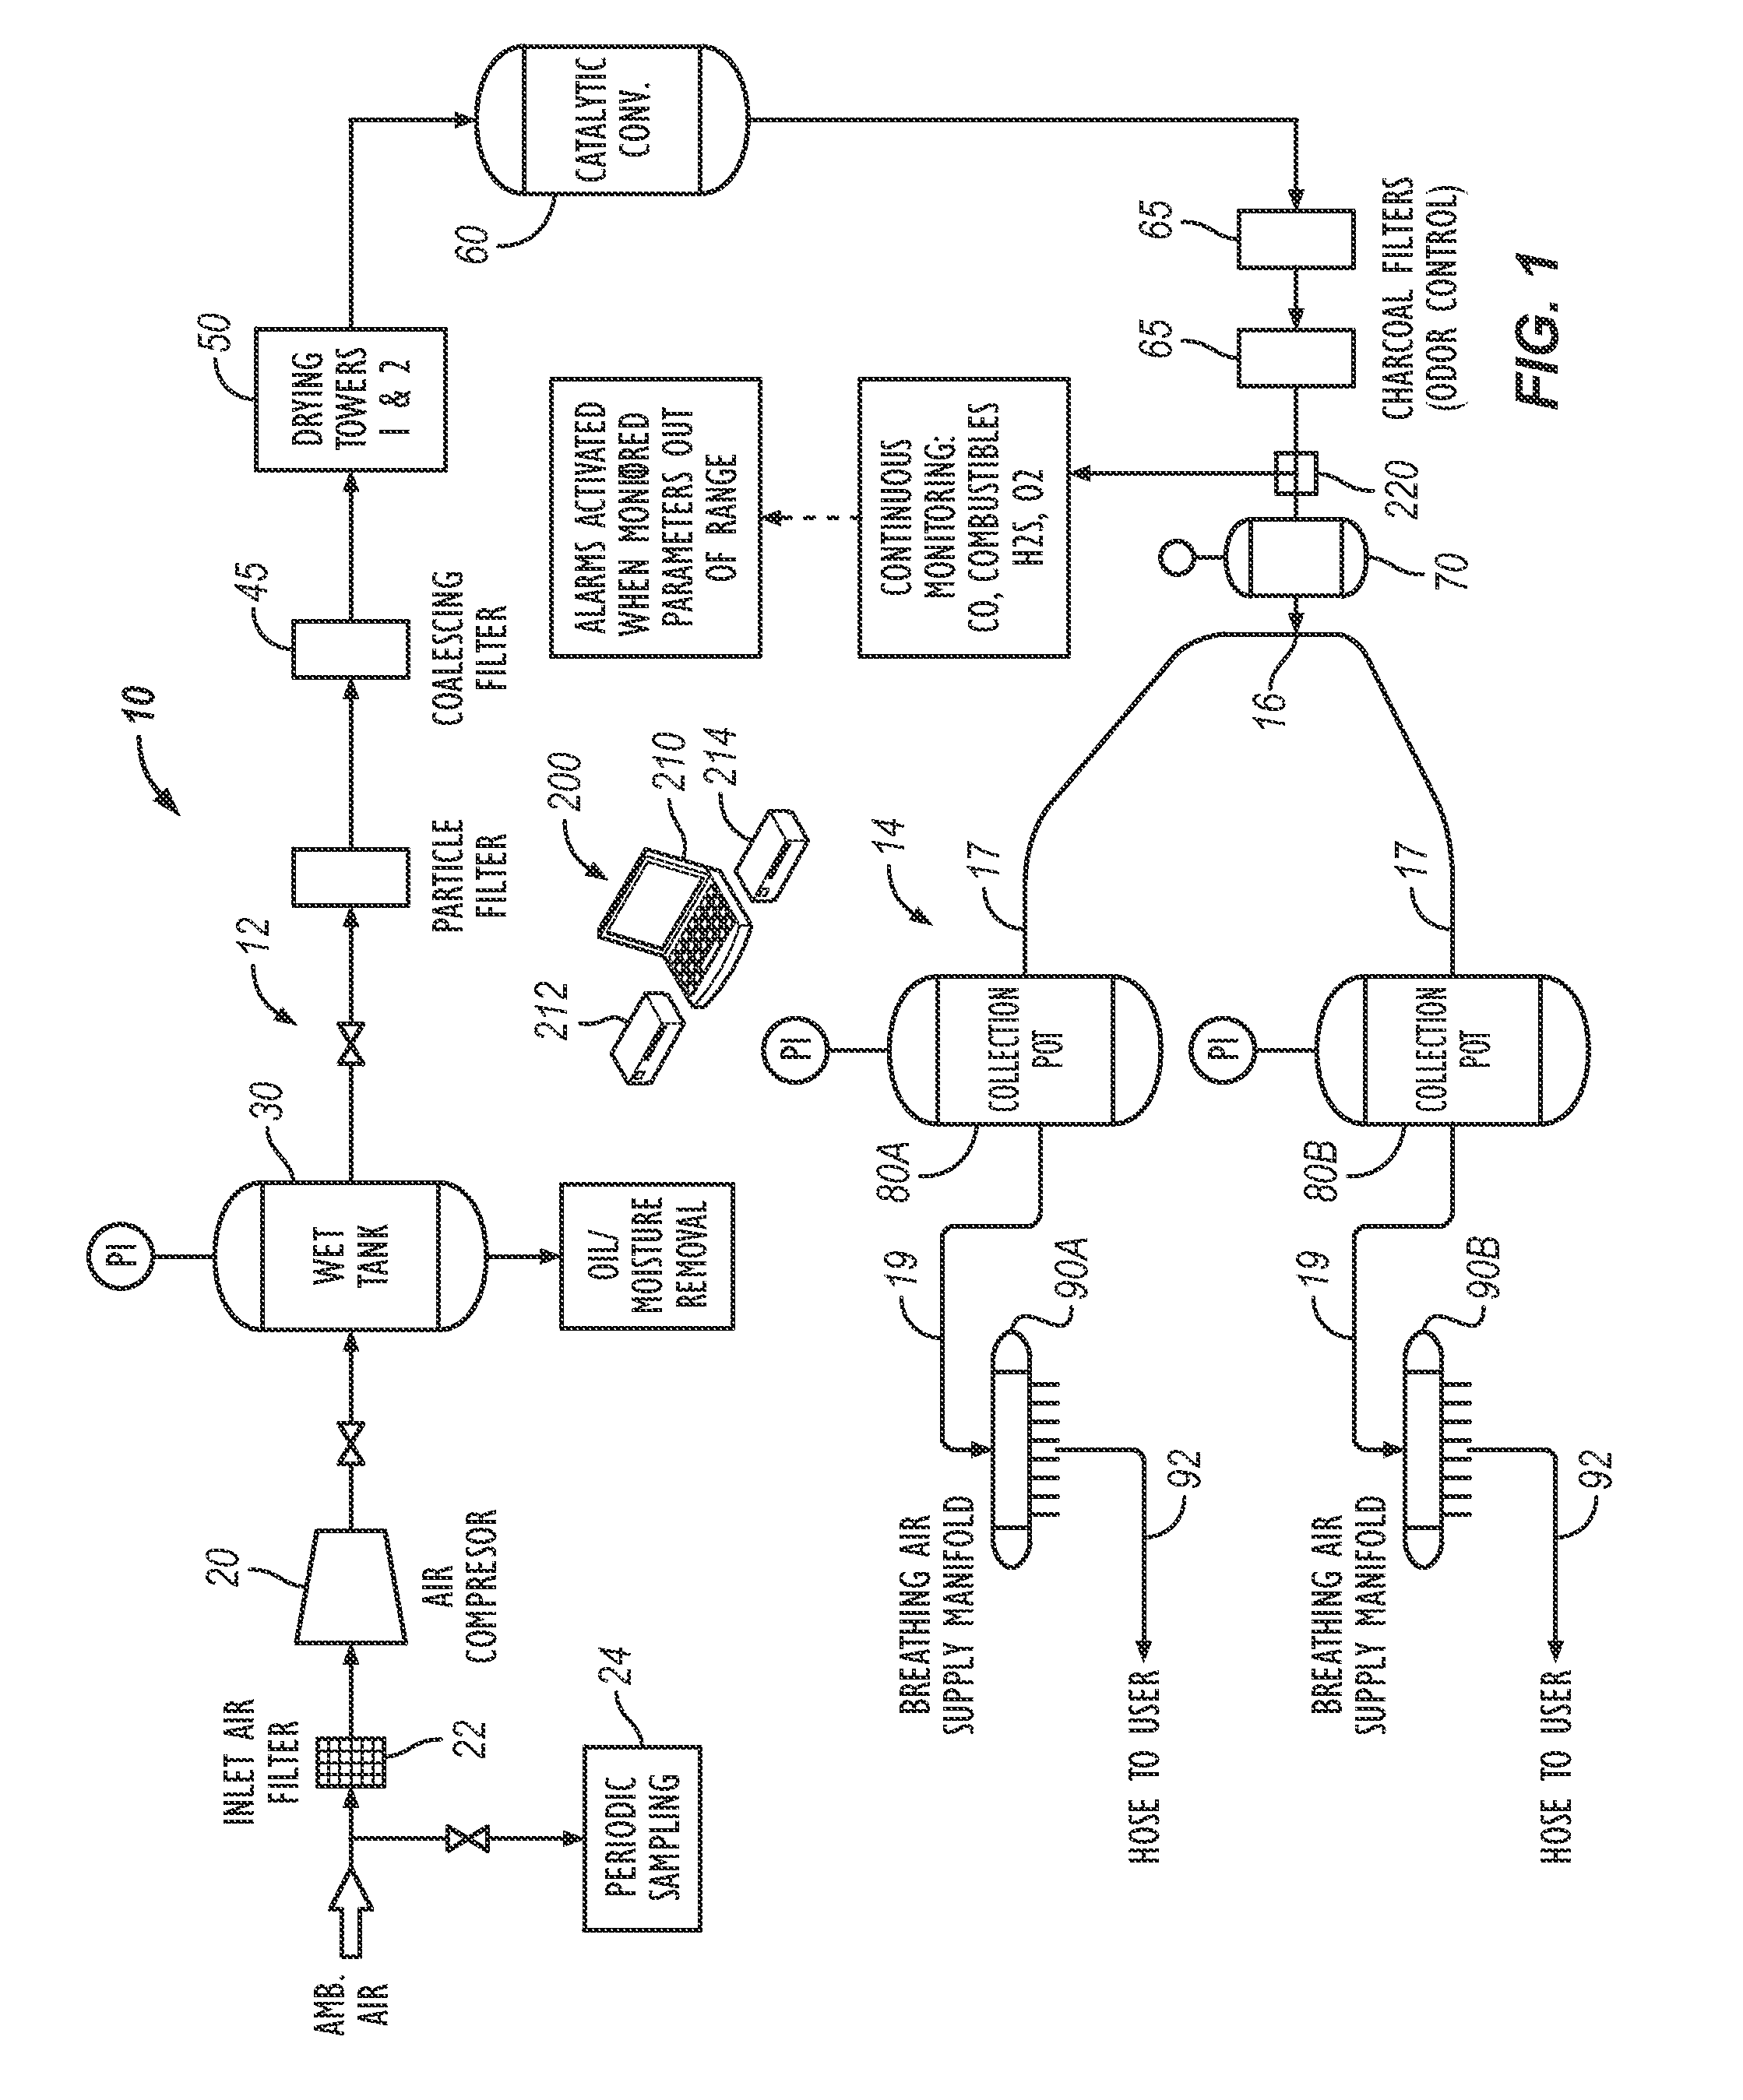 Breathing Air Production and Distribution System